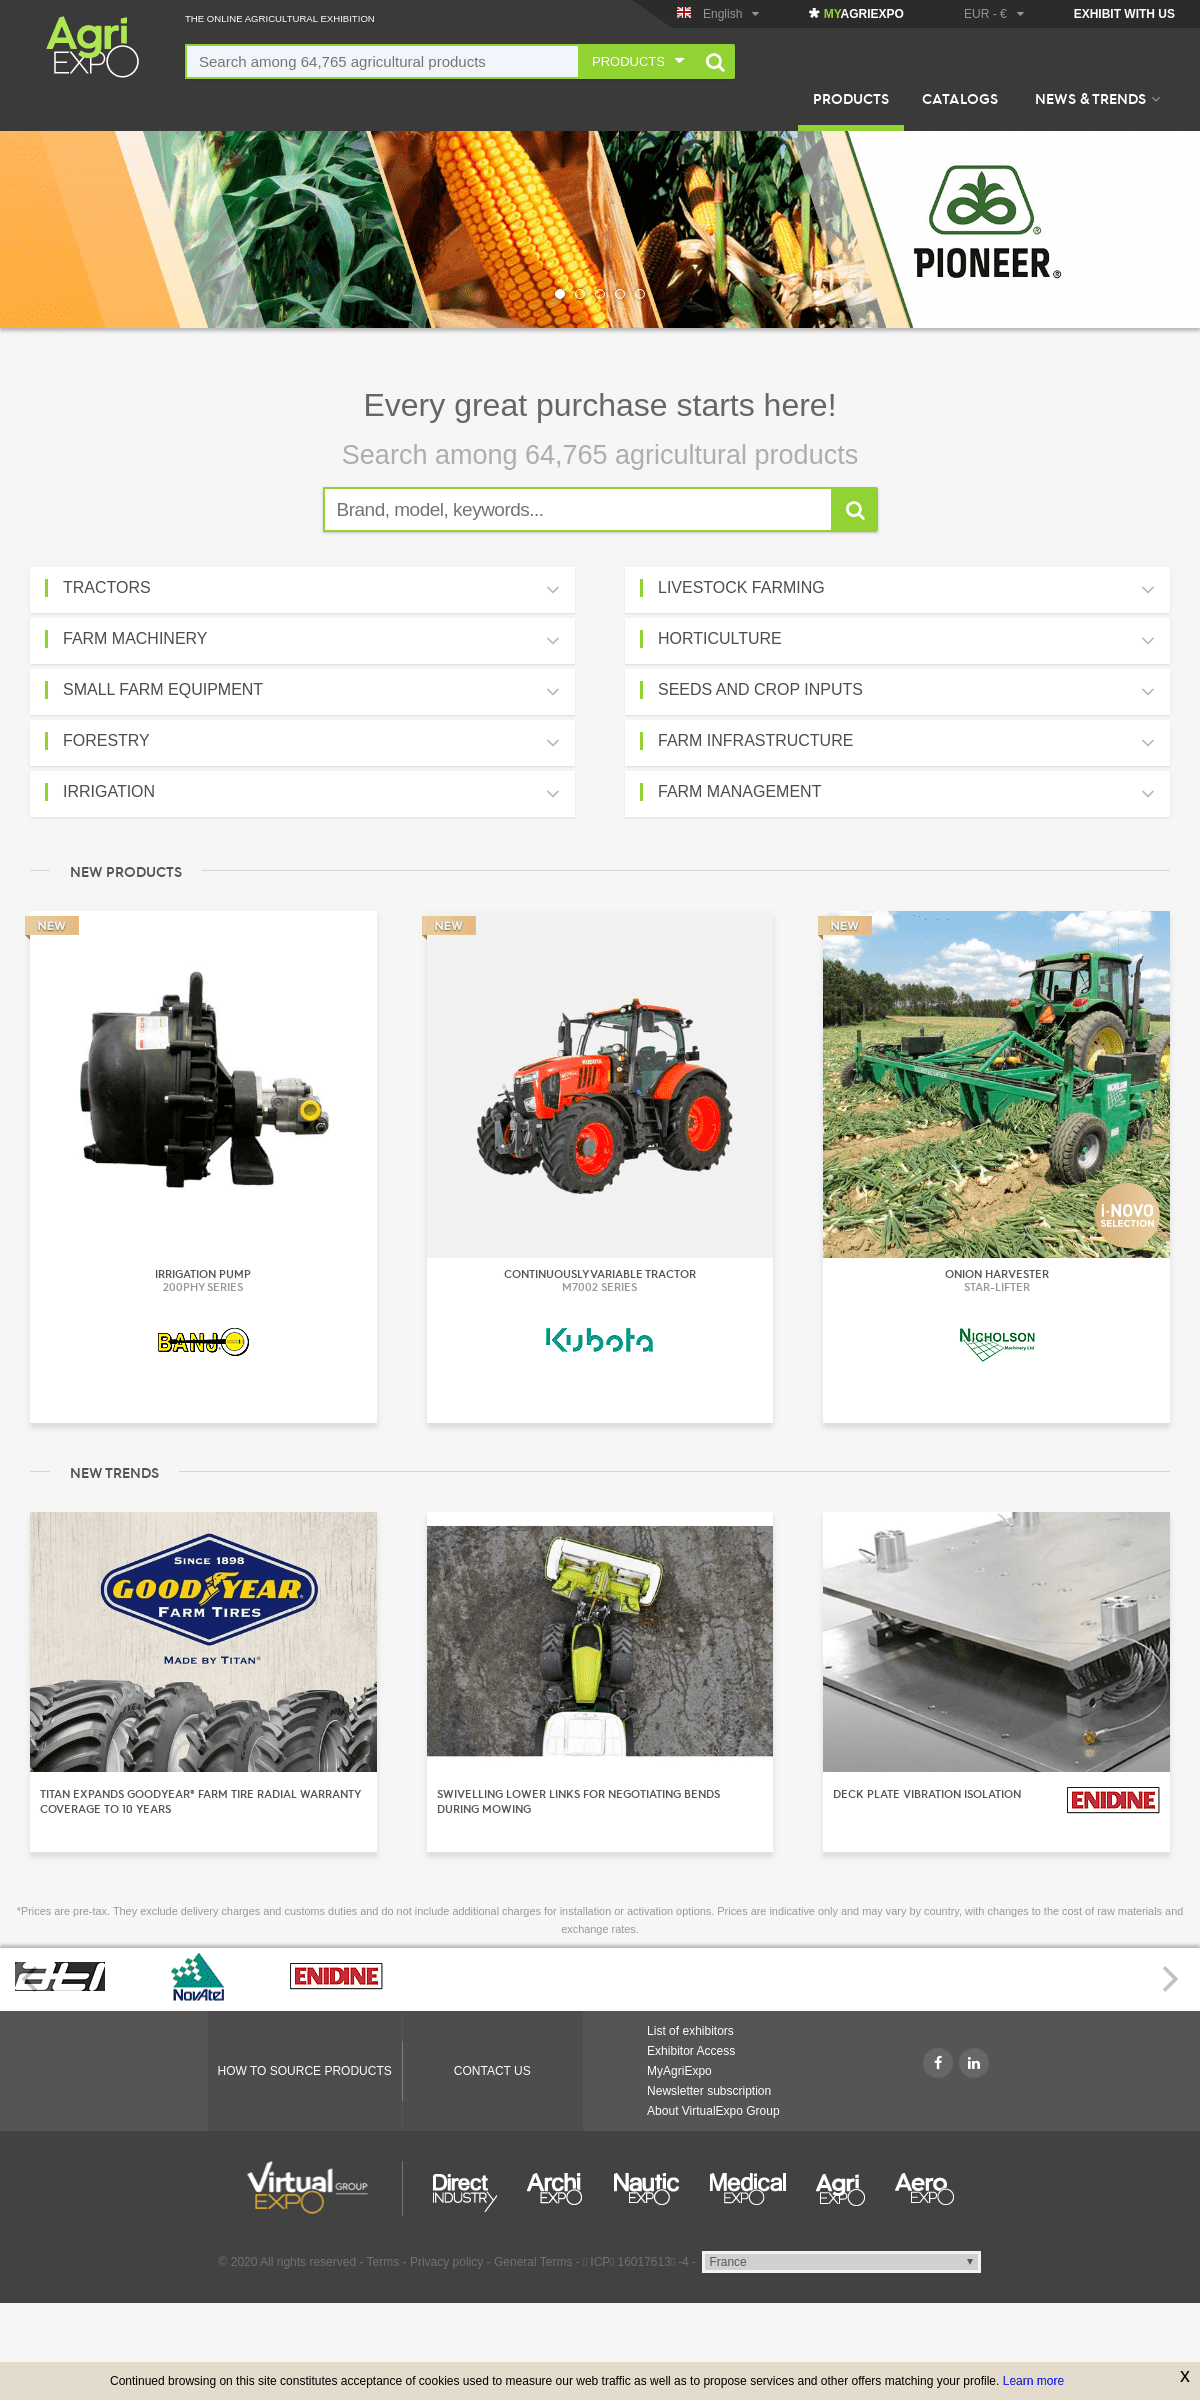 A complete backup of agriexpo.online